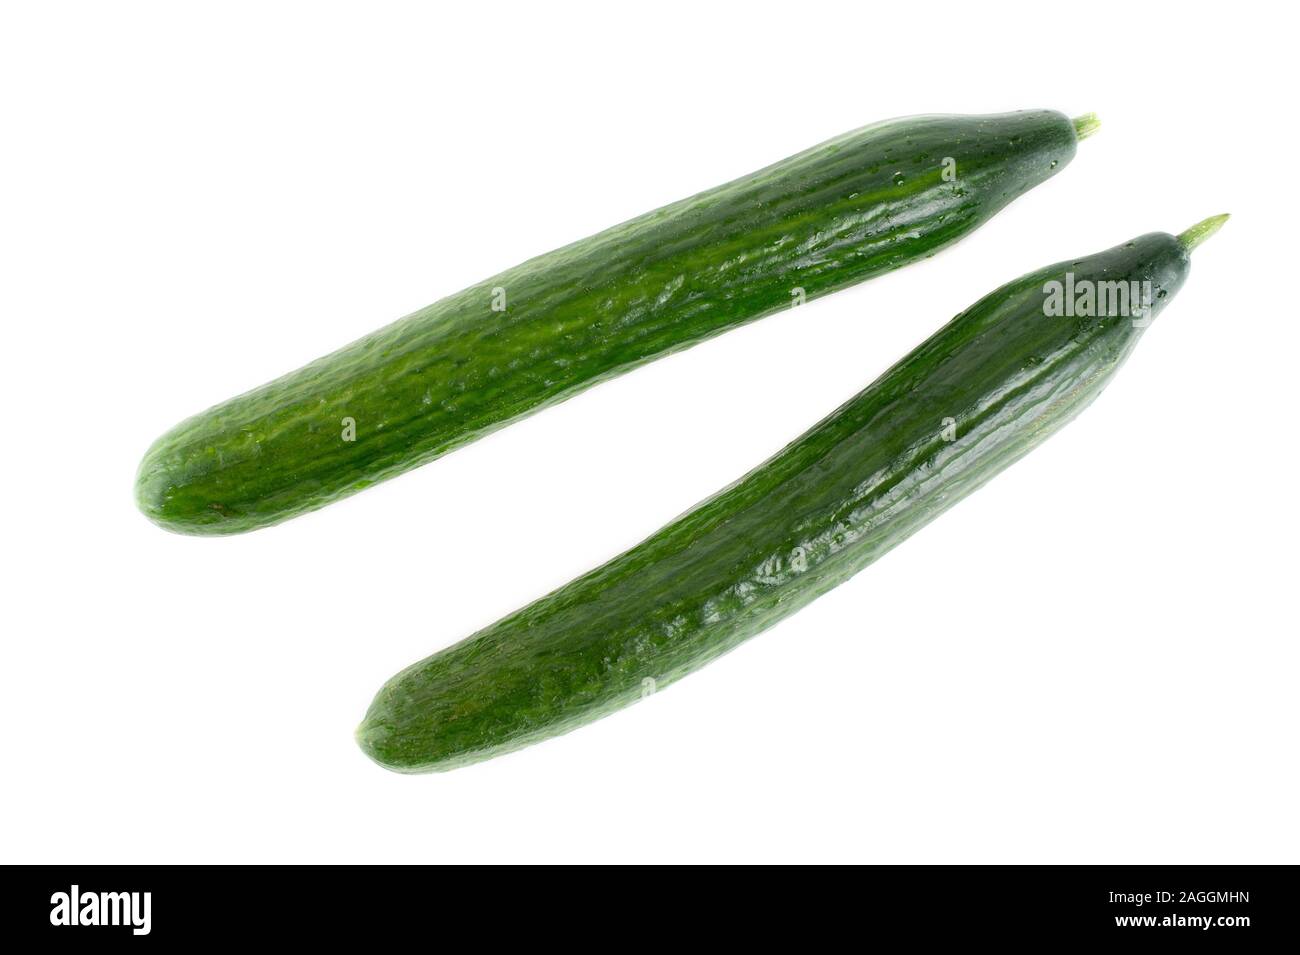 Two organic cucumbers on white background Stock Photo